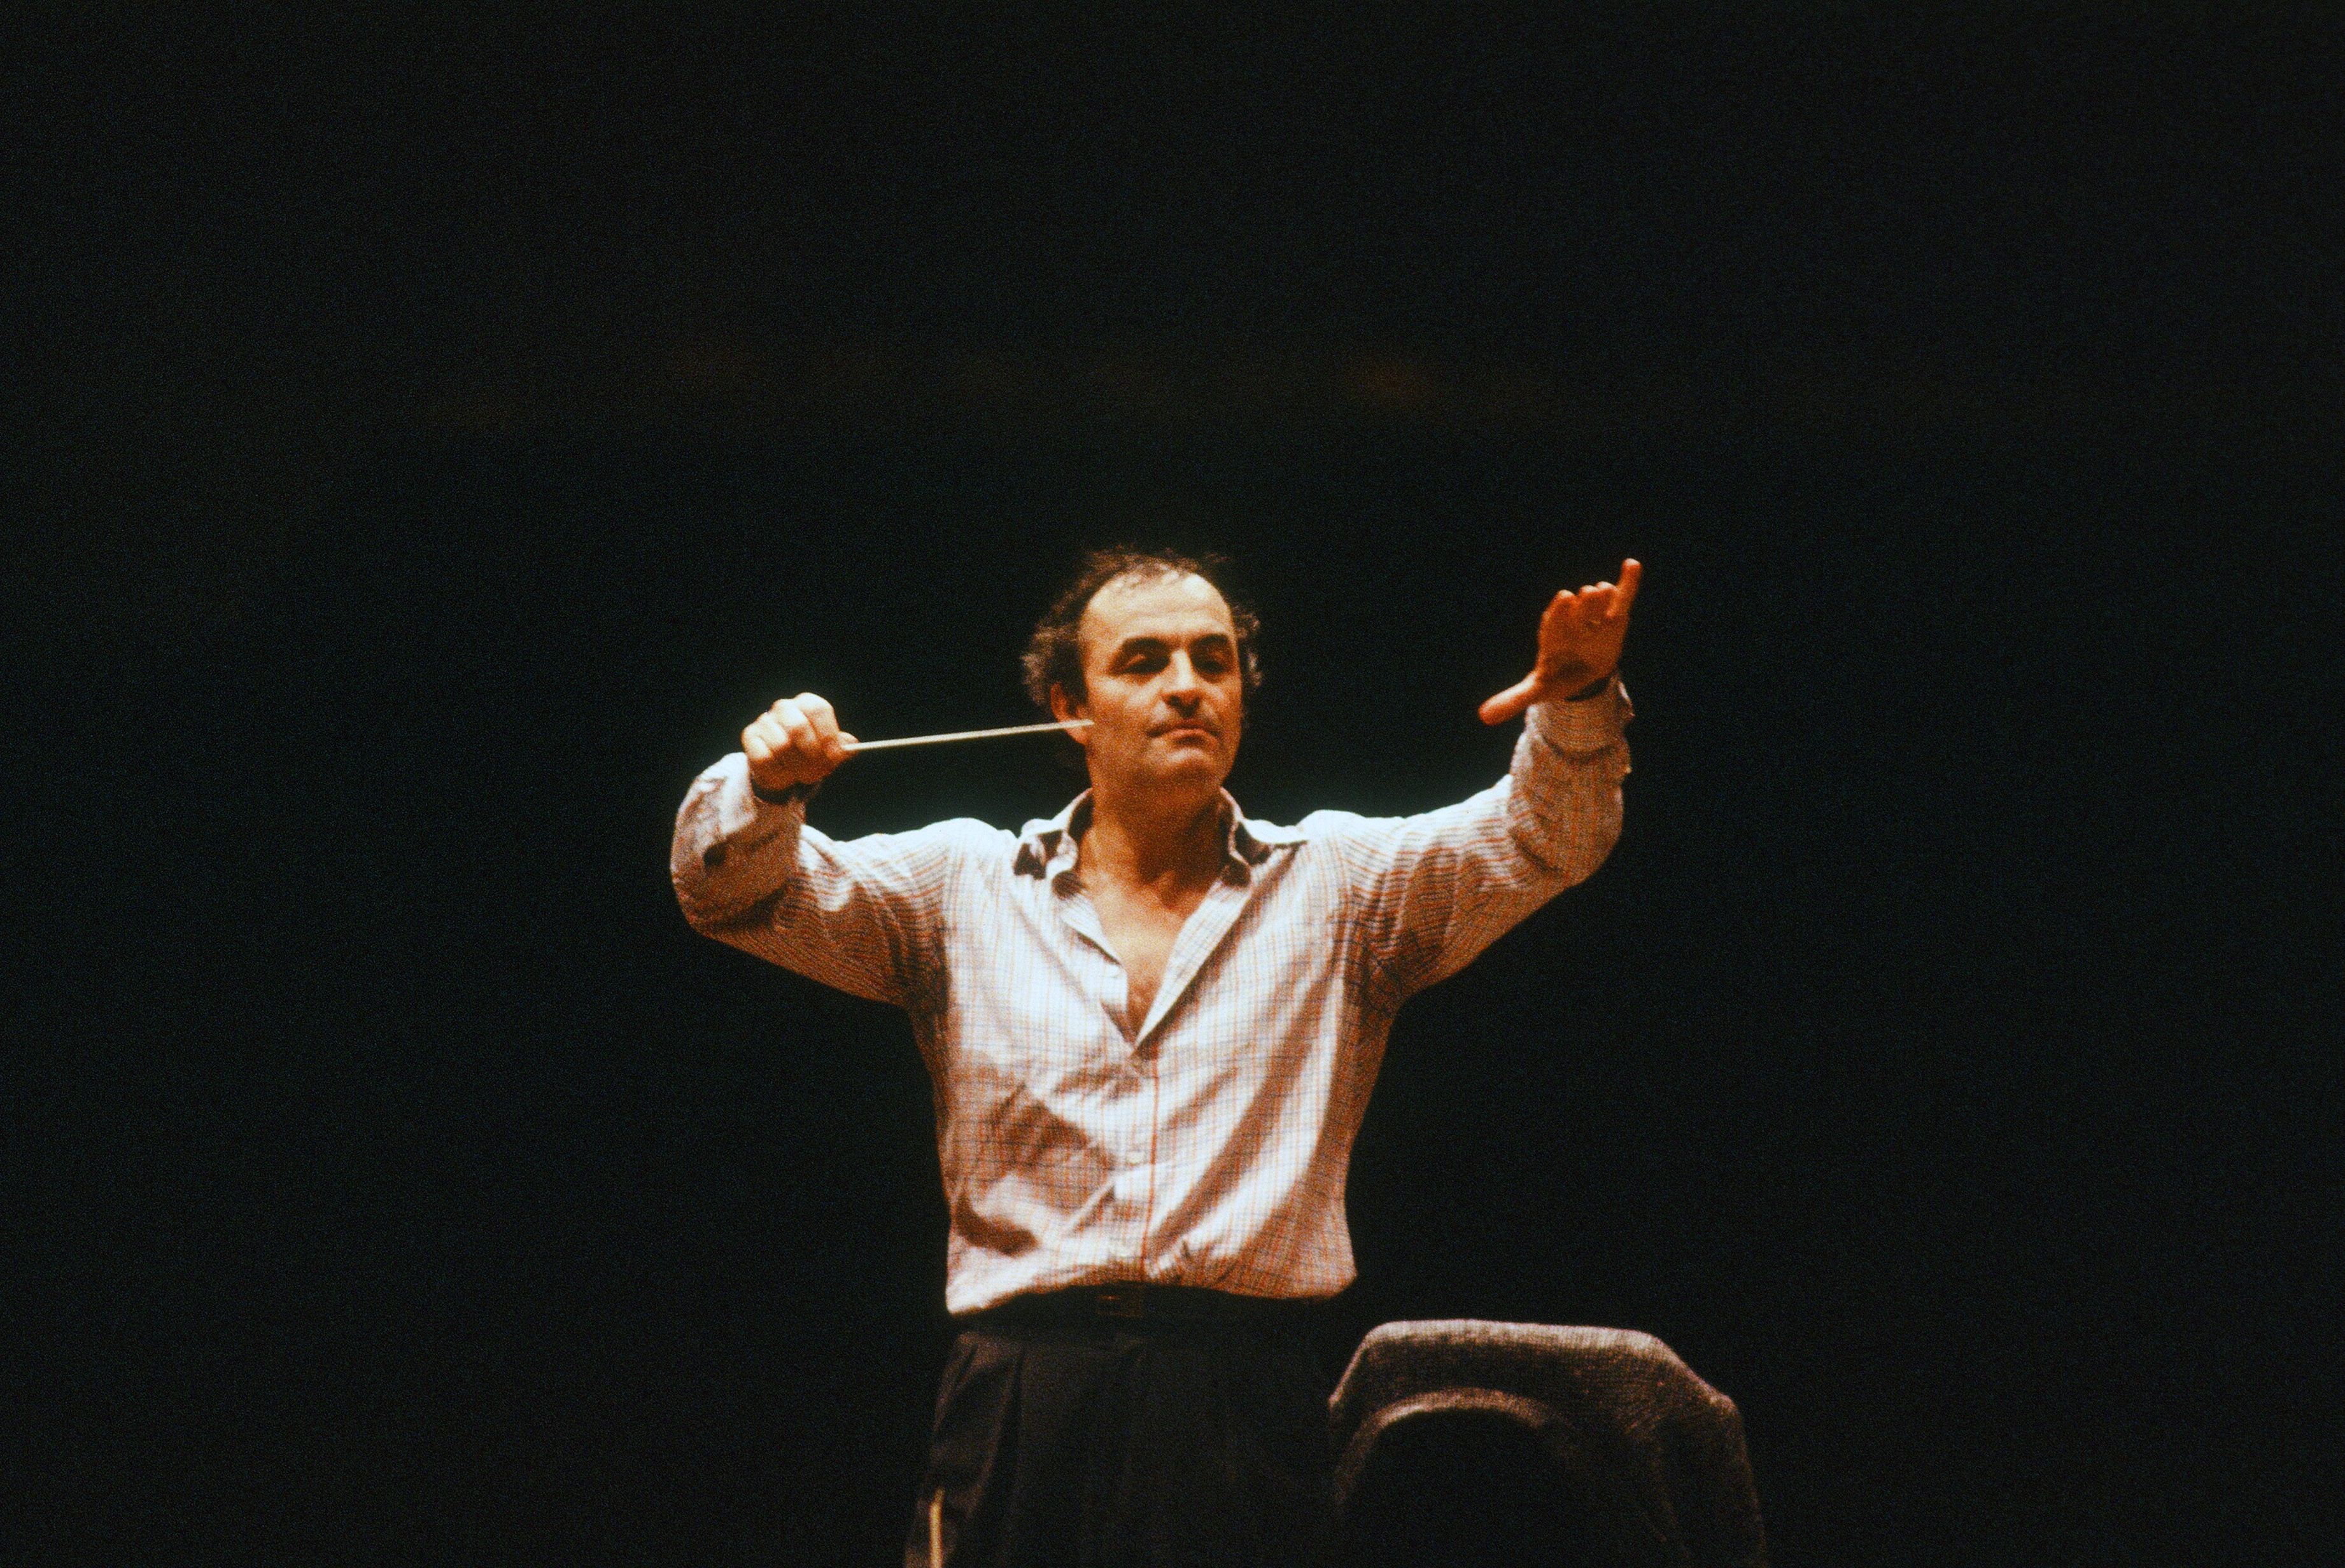 Swiss conductor Charles Dutoit conducting at Avery Fisher Hall on January 1, 1985 in New York City. (Waring Abbott—Getty Images)